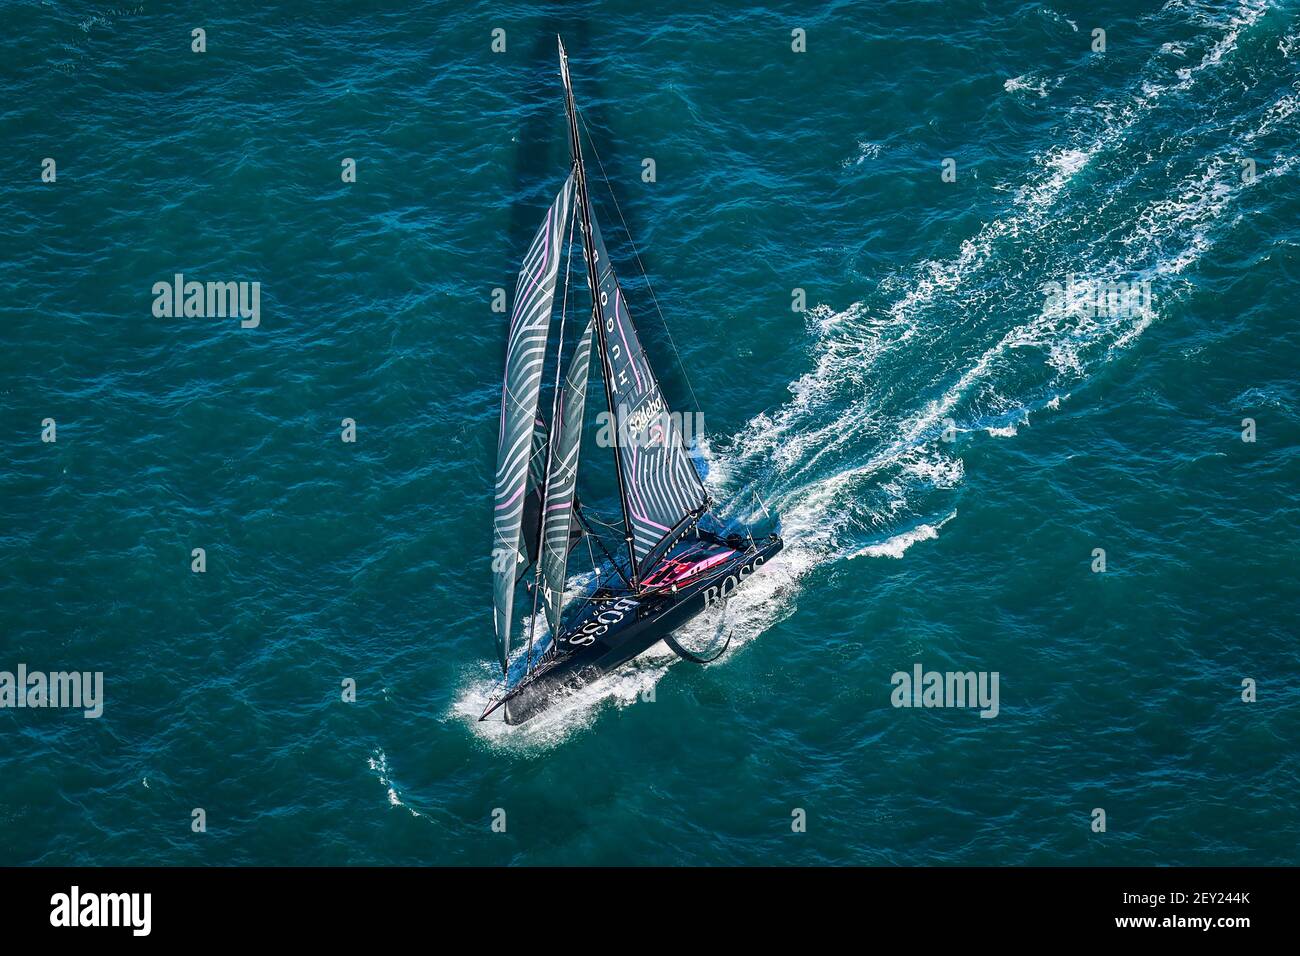 Alex Thomson (gbr) sailing on the Imoca Hugo Boss during the start of the  2020-2021 Vendée Globe, 9th edition of the solo non-stop round the world  yacht race, on November 9, 2020